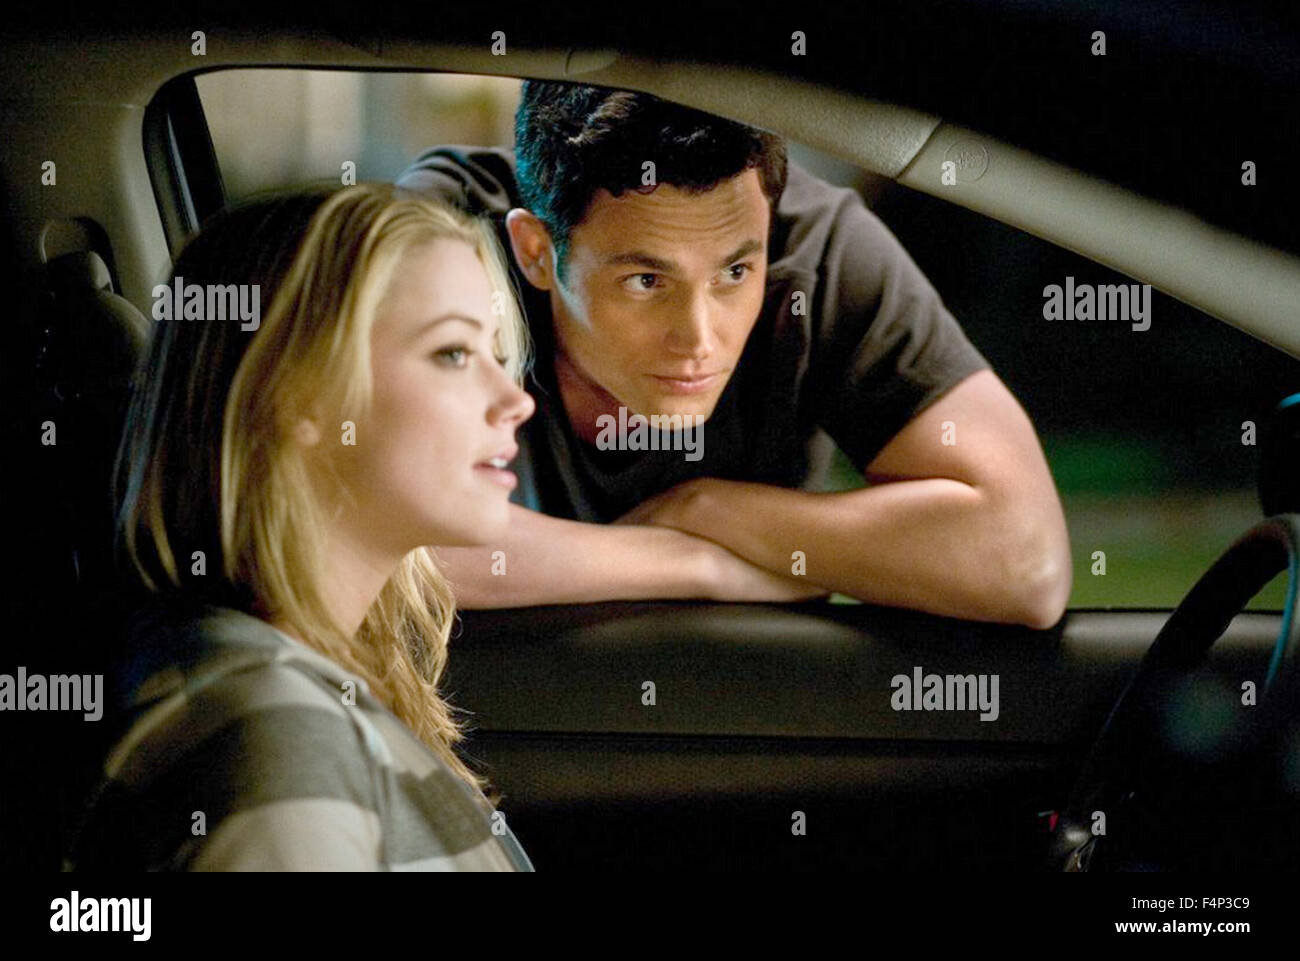 THE STEPFATHER 2009 film with Amber Heard and Penn Badgley Stock ...